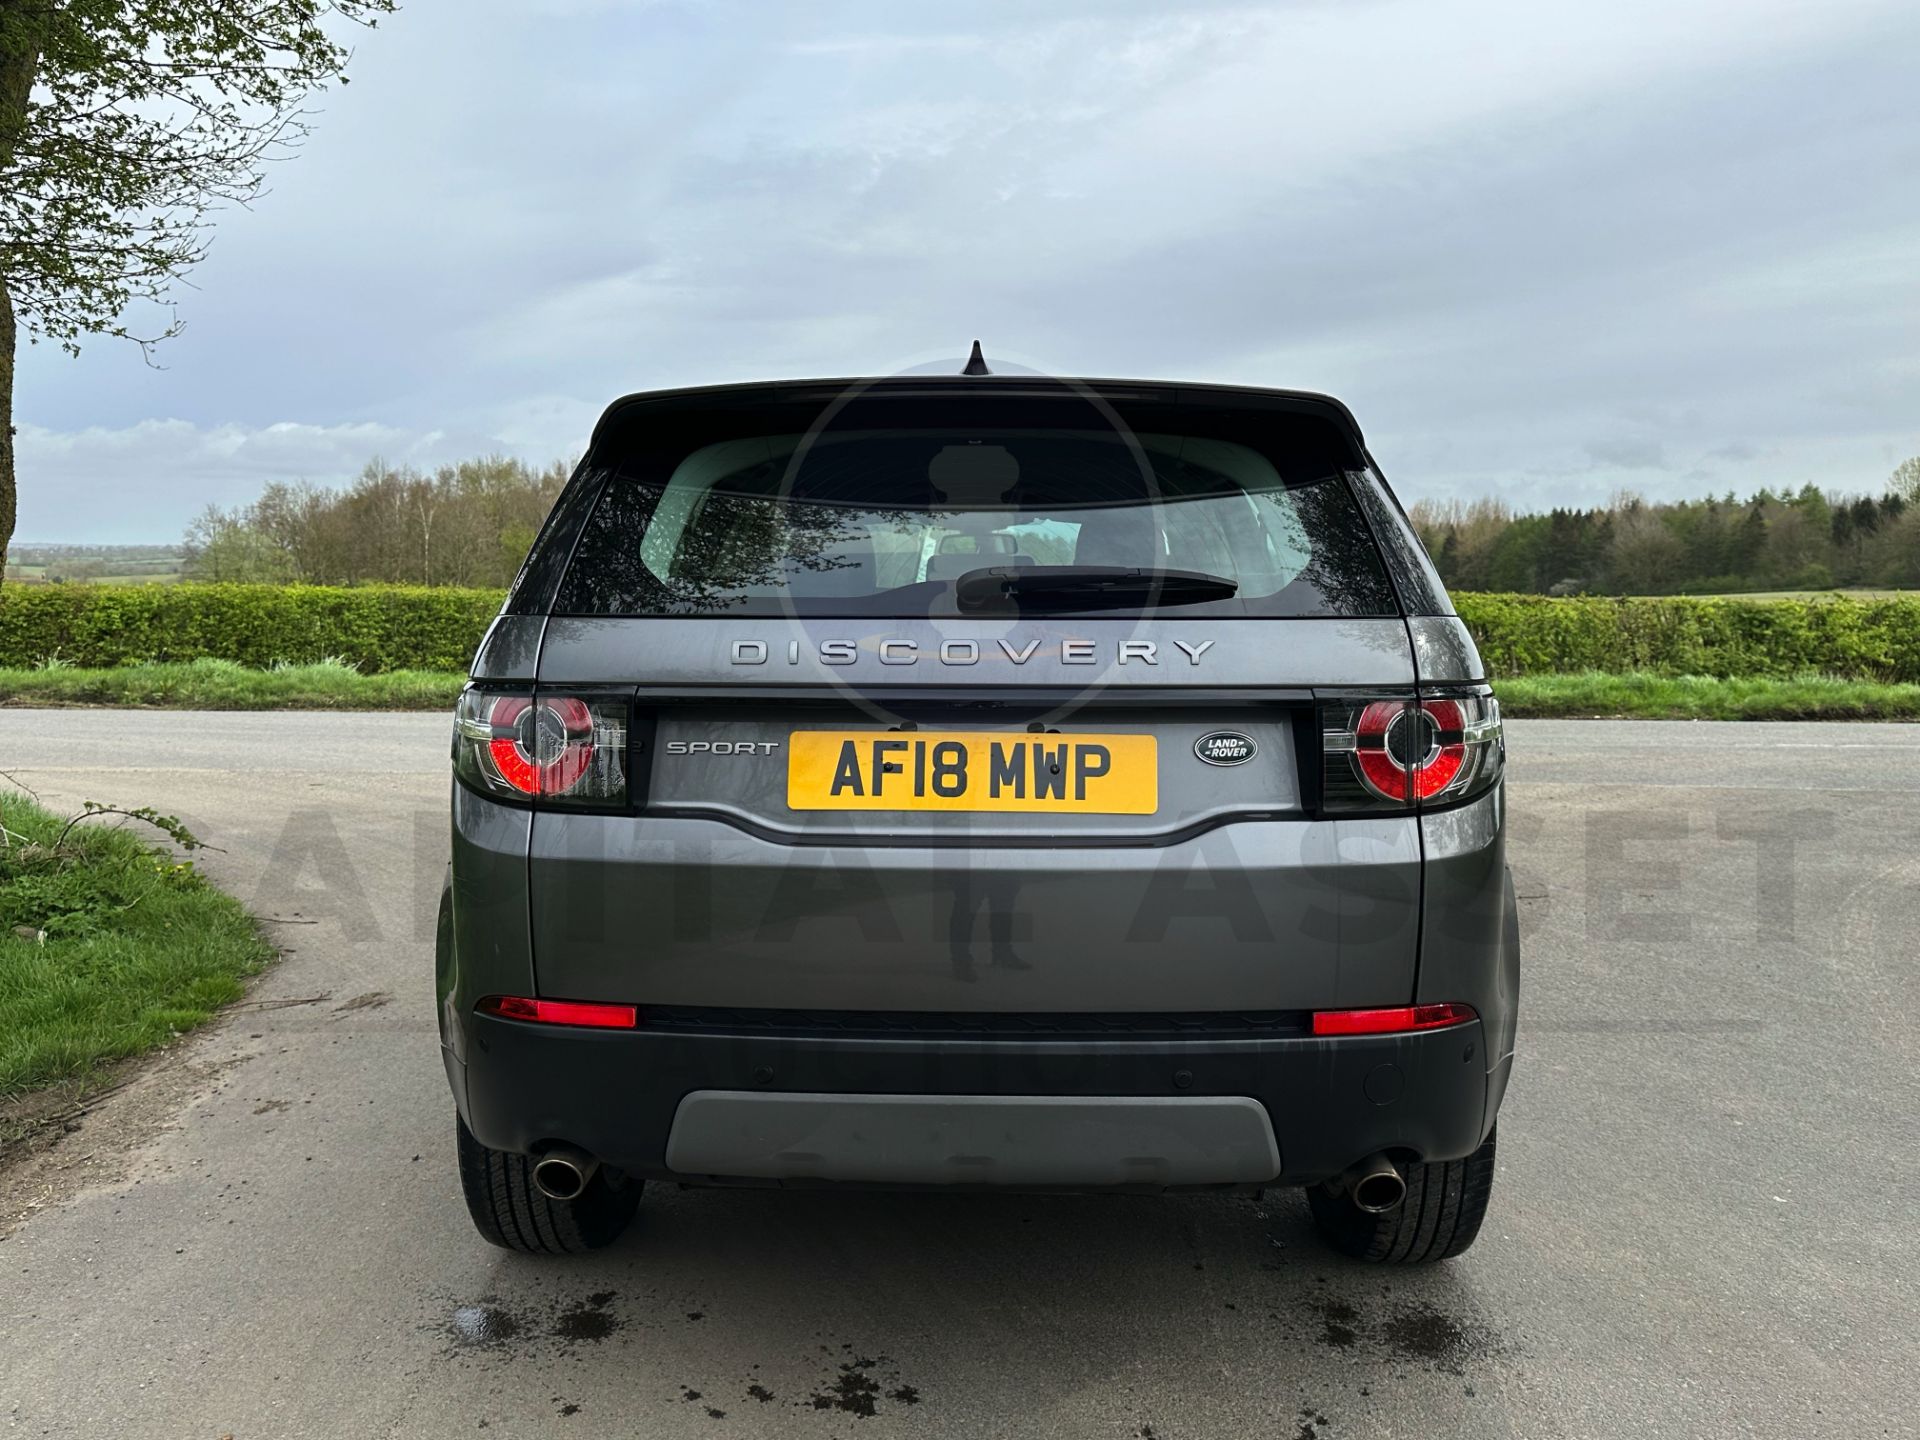 (On Sale) LAND ROVER DISCOVERY SPORT *SE TECH* 5 DOOR SUV (2018 - EURO 6) 2.0 TD4 - AUTO *HUGE SPEC* - Image 11 of 51